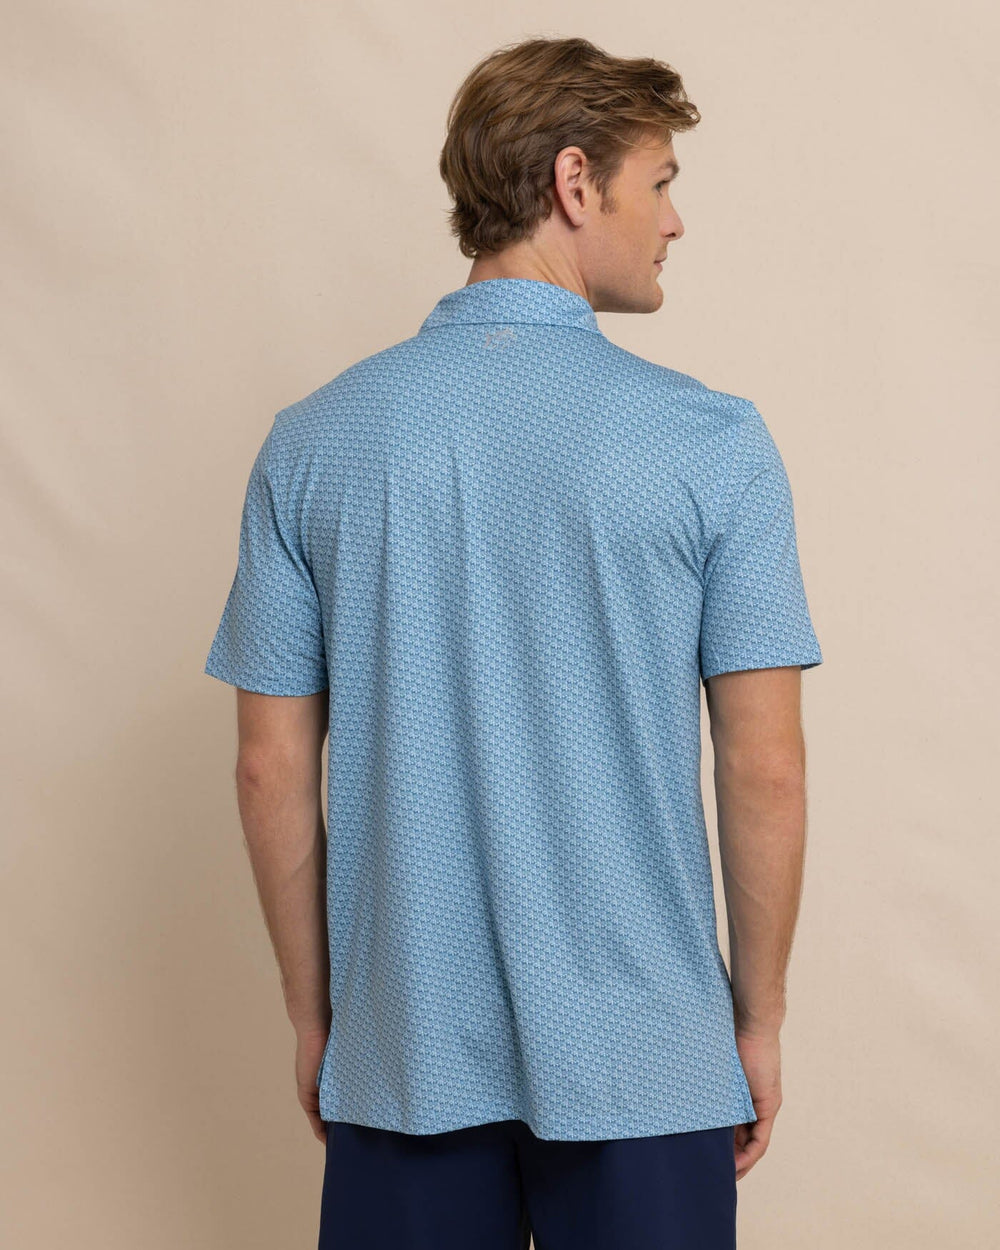 The back view of the Southern Tide Driver Vacation Views Printed Polo by Southern Tide - Clearwater Blue